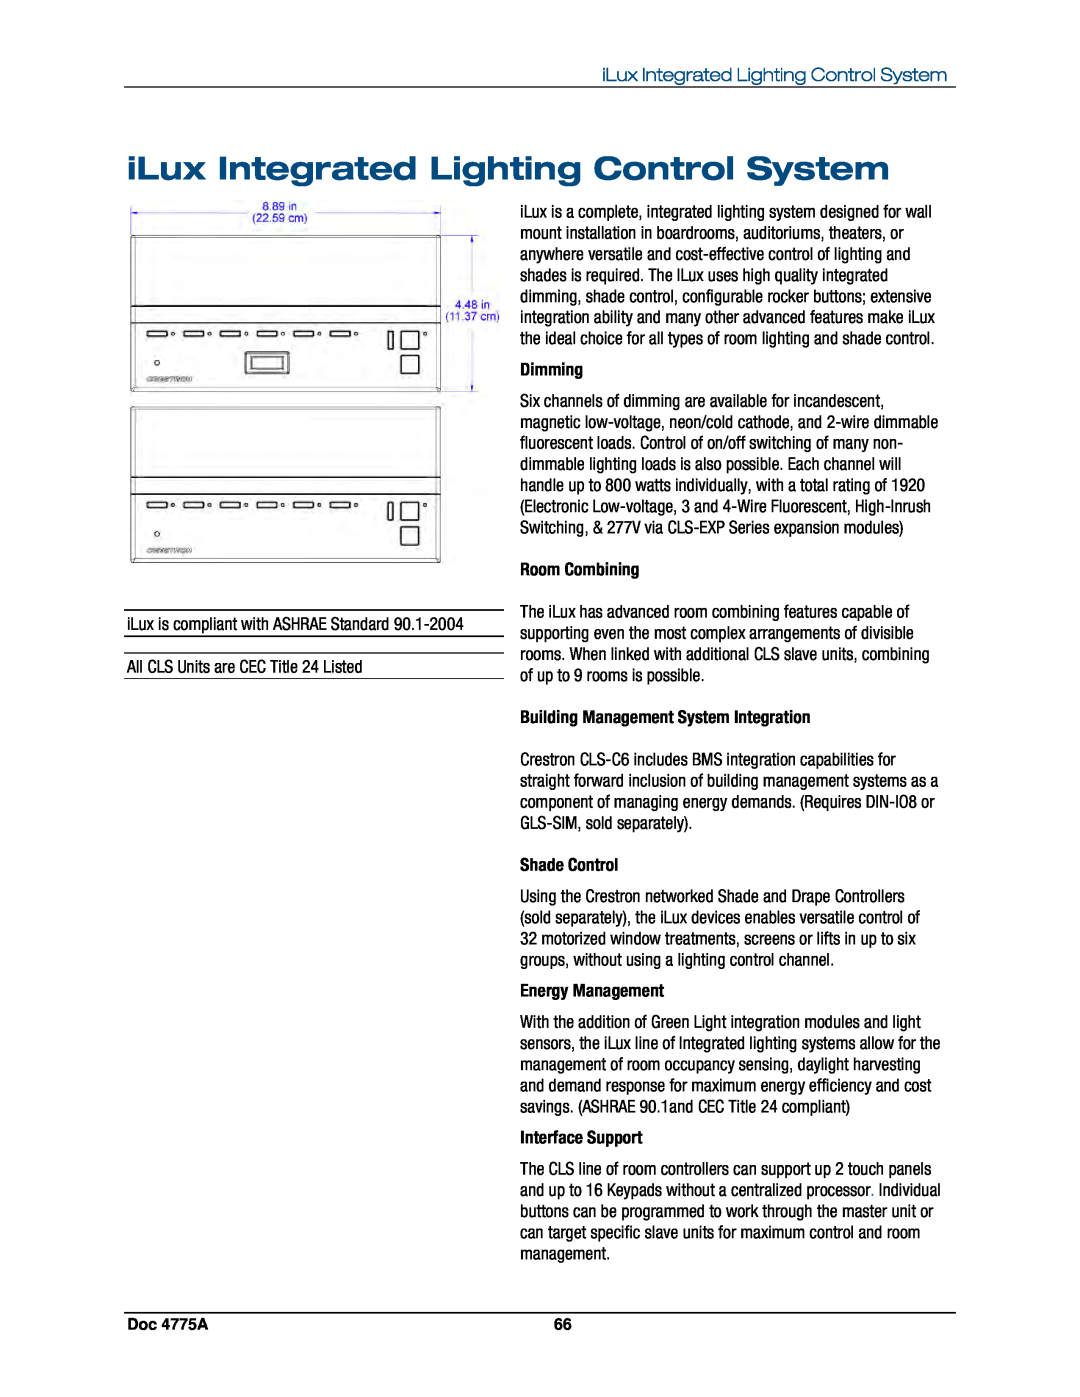 Crestron electronic GLPS-HDSW-FT, IPAC-GL1 iLux Integrated Lighting Control System, Dimming, Room Combining, Shade Control 